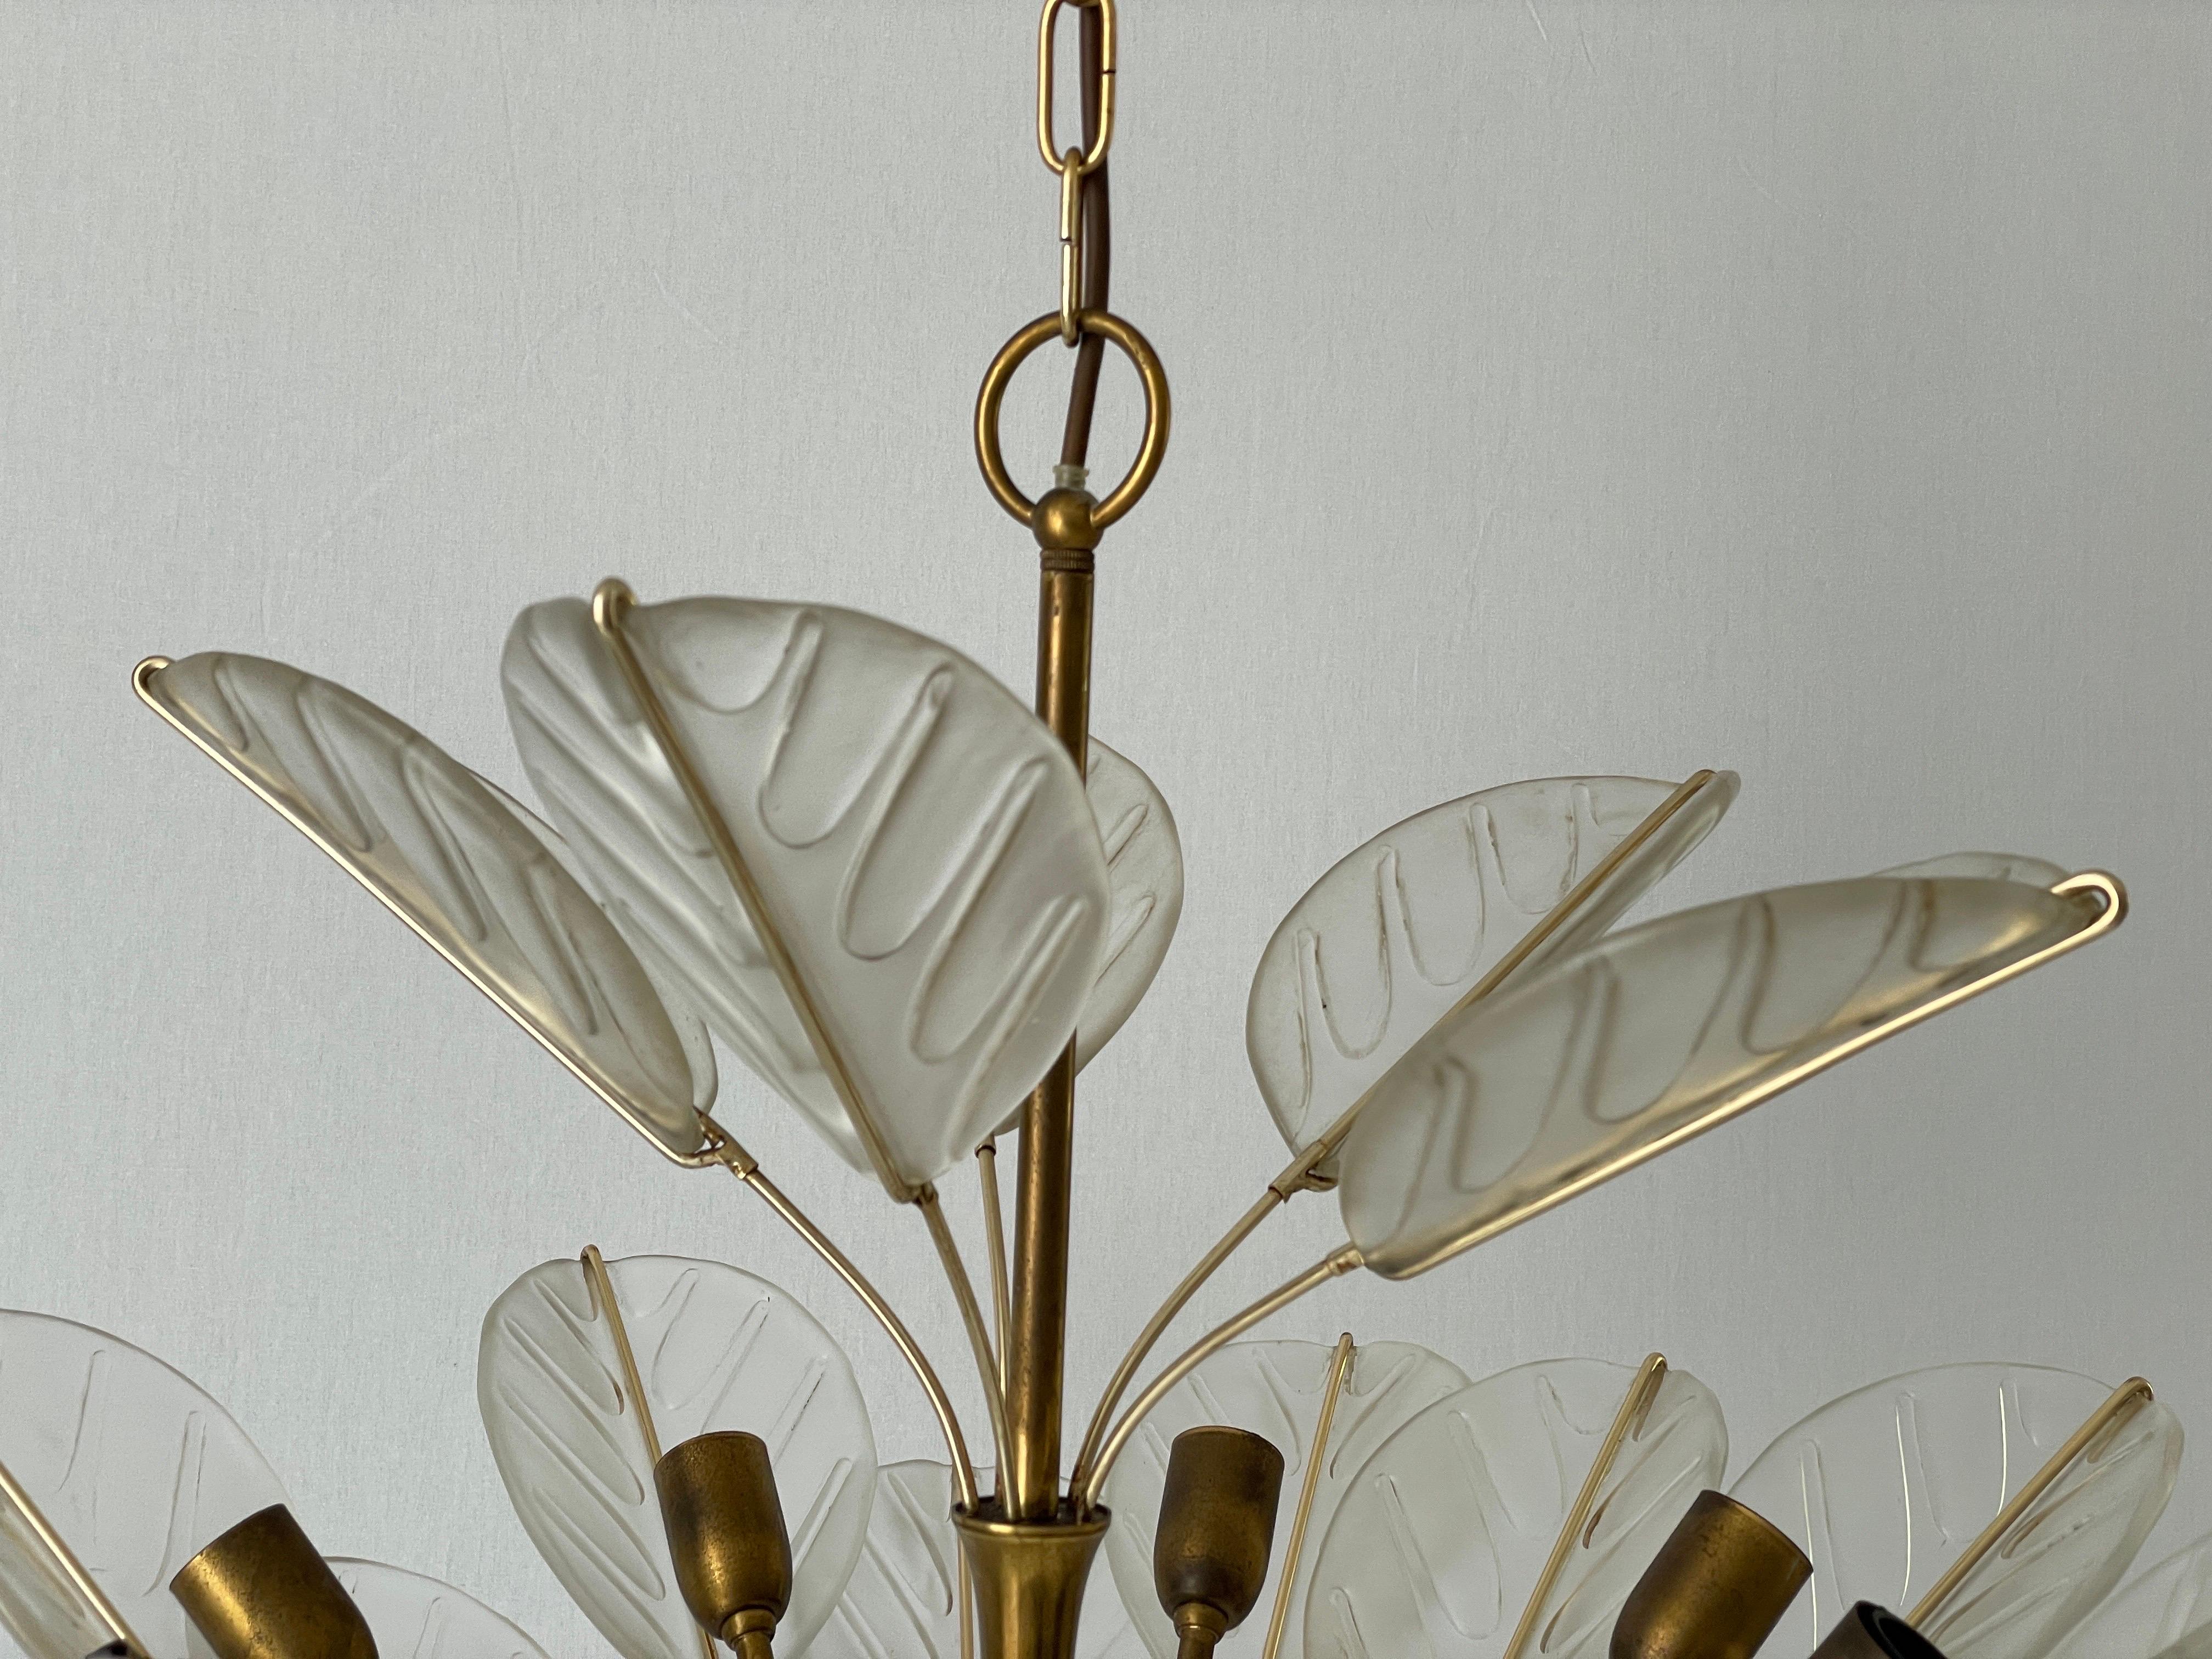 Luxurious 8-armed Brass Chandelier with Crystal Glass Leaves, 1960s, Germany For Sale 4